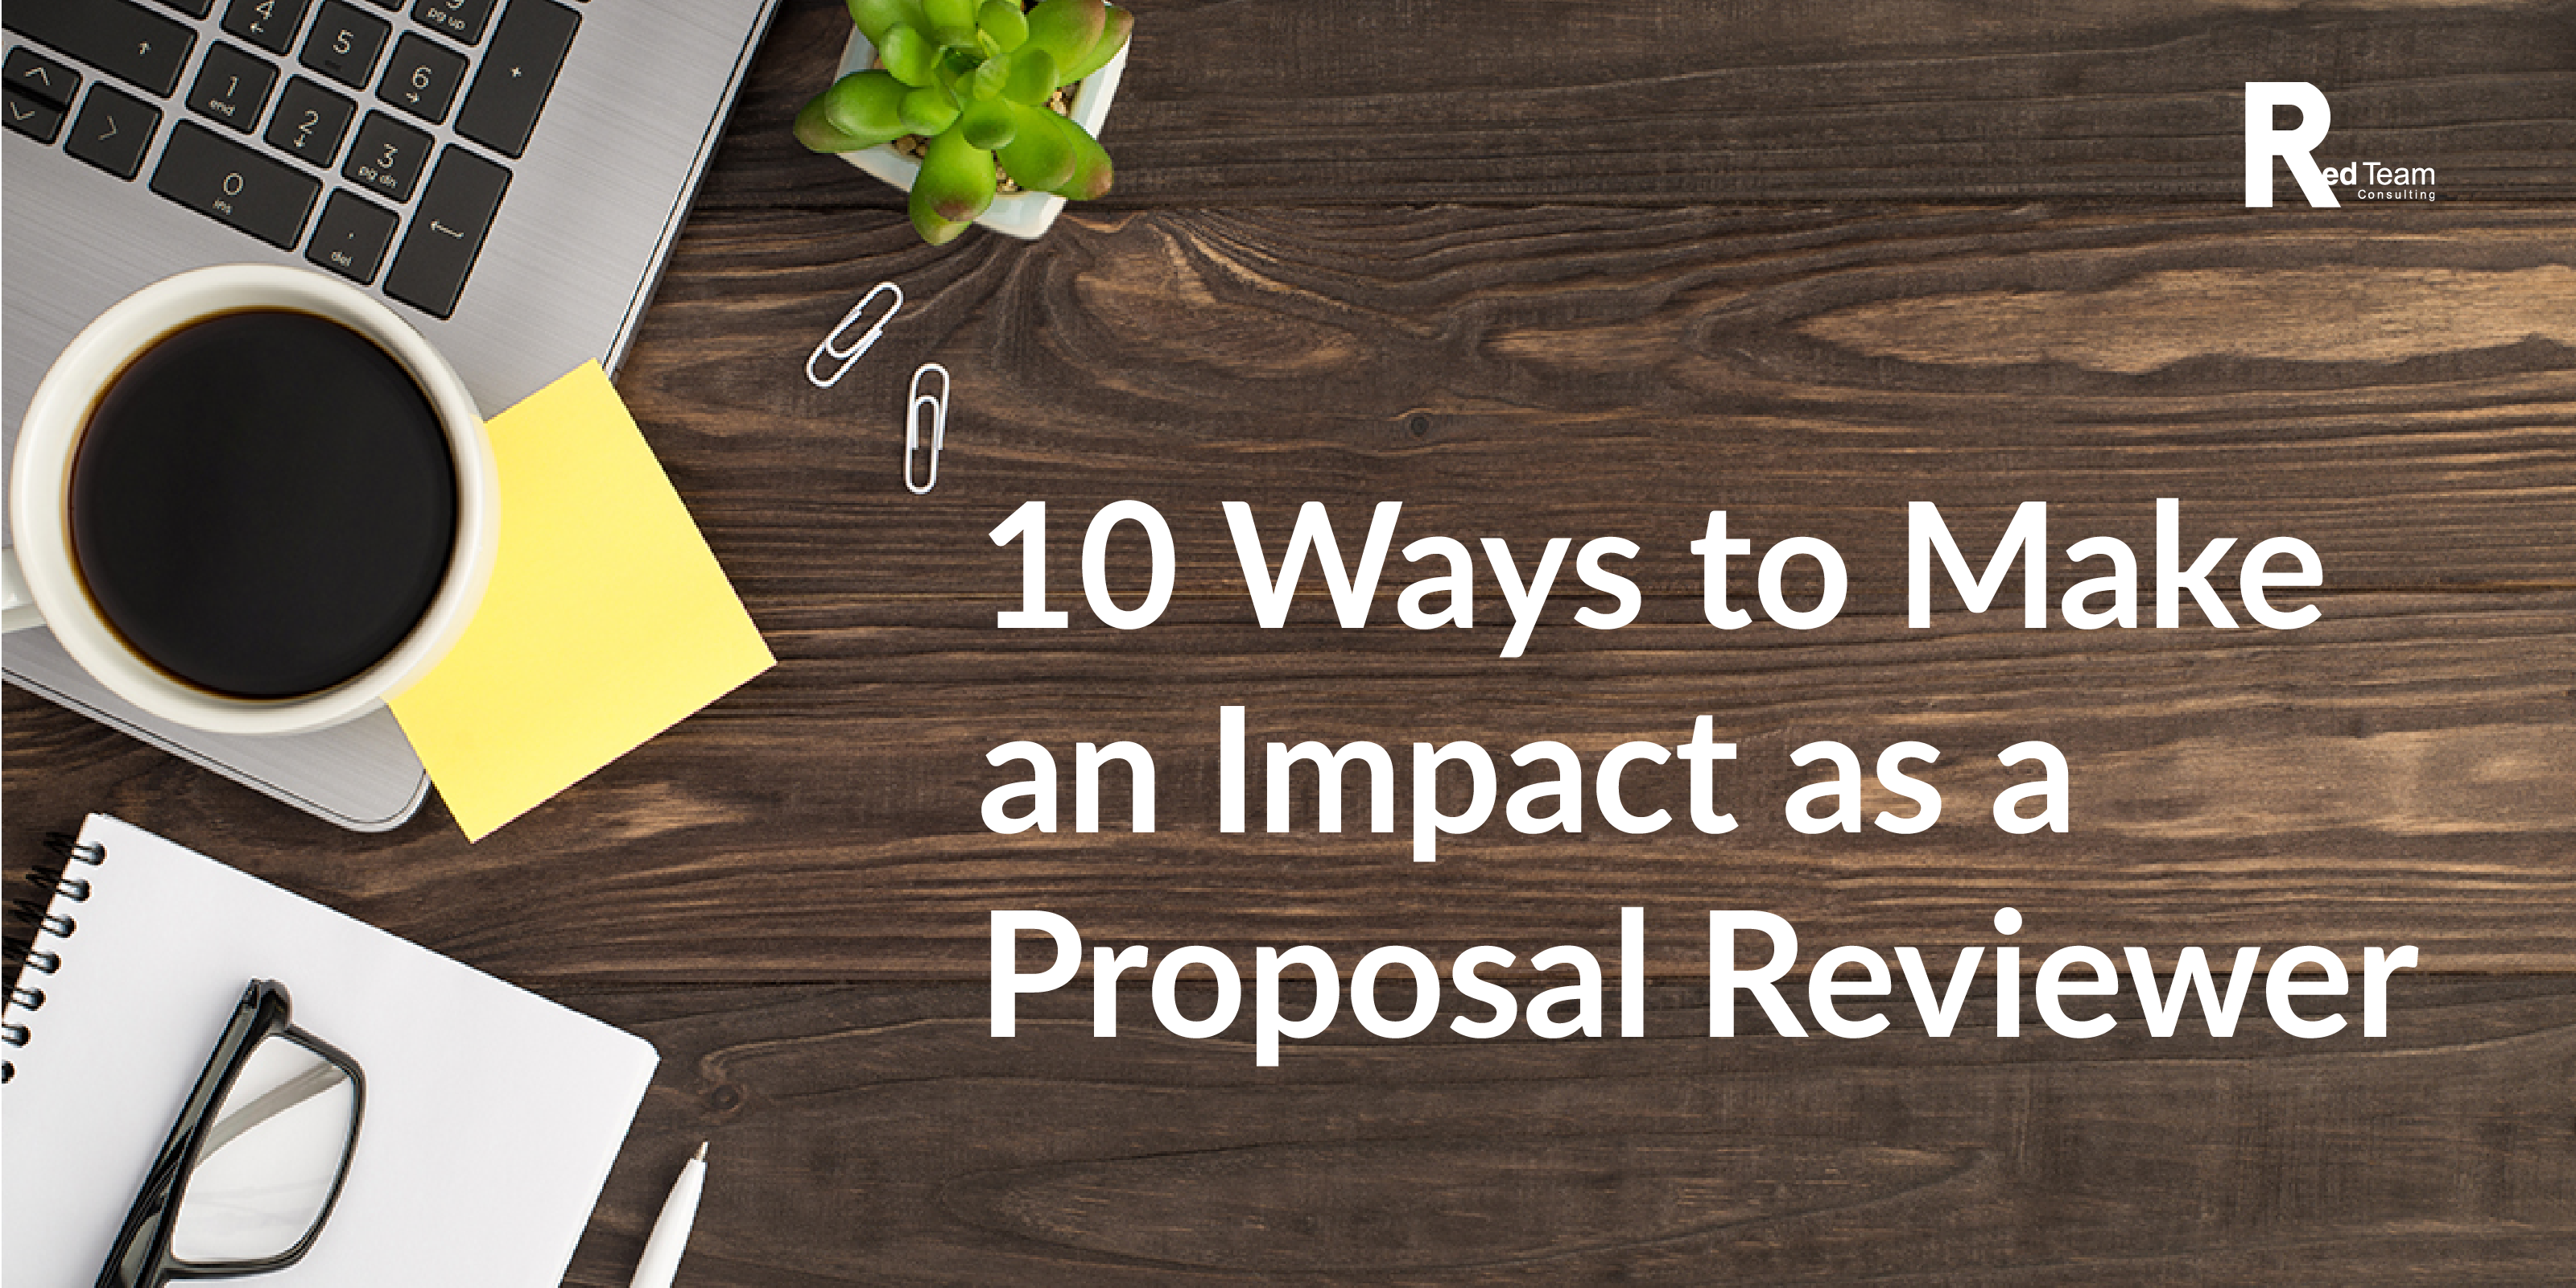 10 Ways to Make an Impact as a Proposal Reviewer